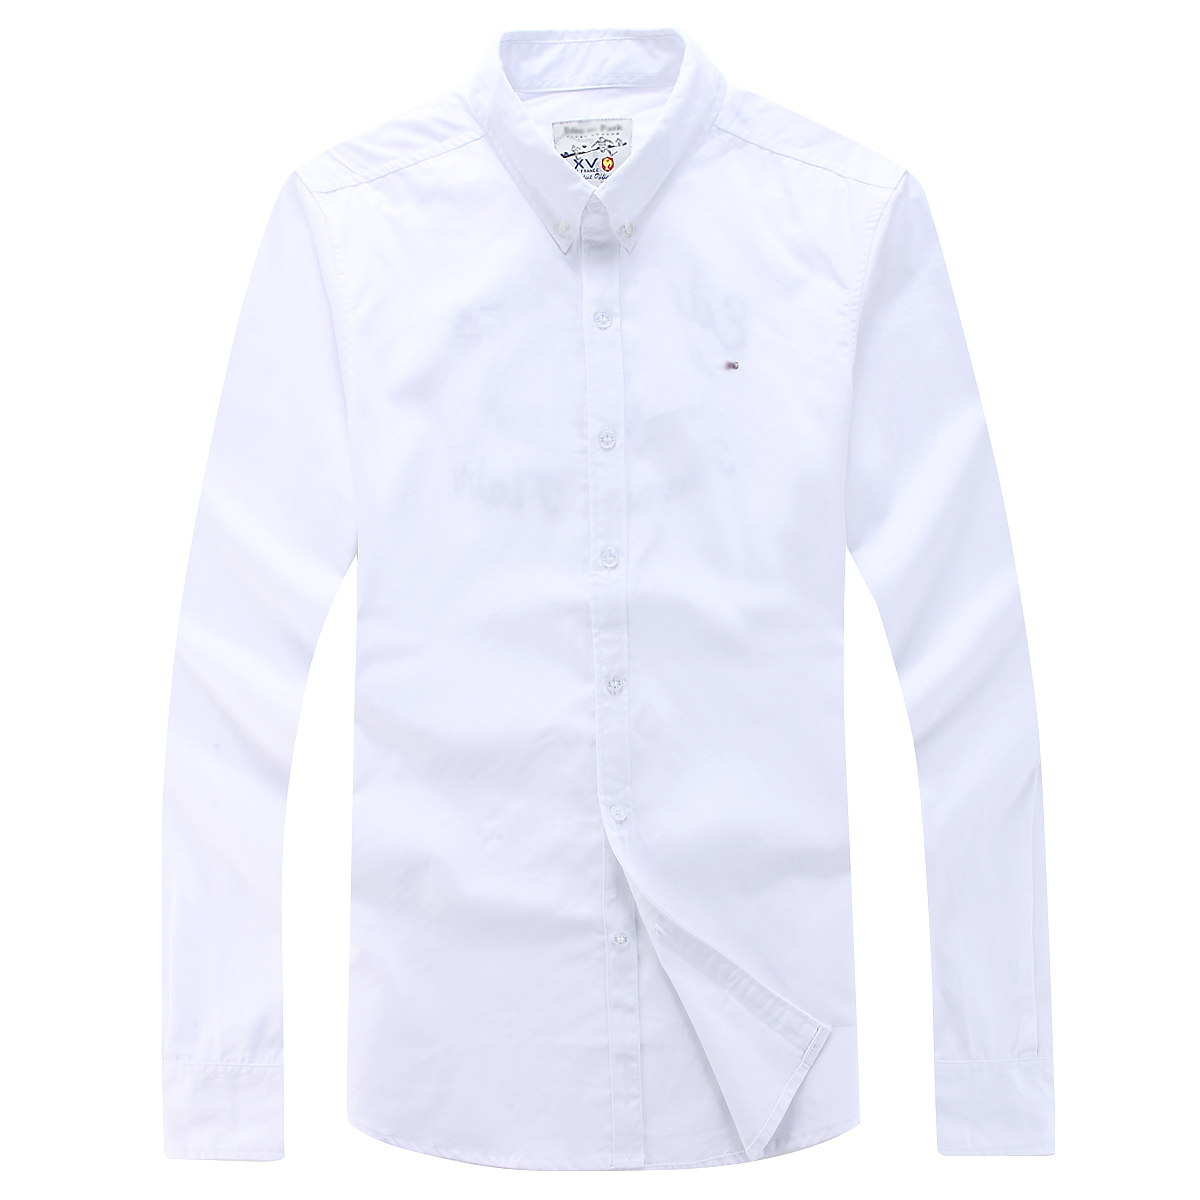 

2019 TOP Eden Park Full Sleeve Shirt Men High Quality Nice Design Business Casual Style Cotton size  L XL XXL Free Shippin Homme Chemise, White